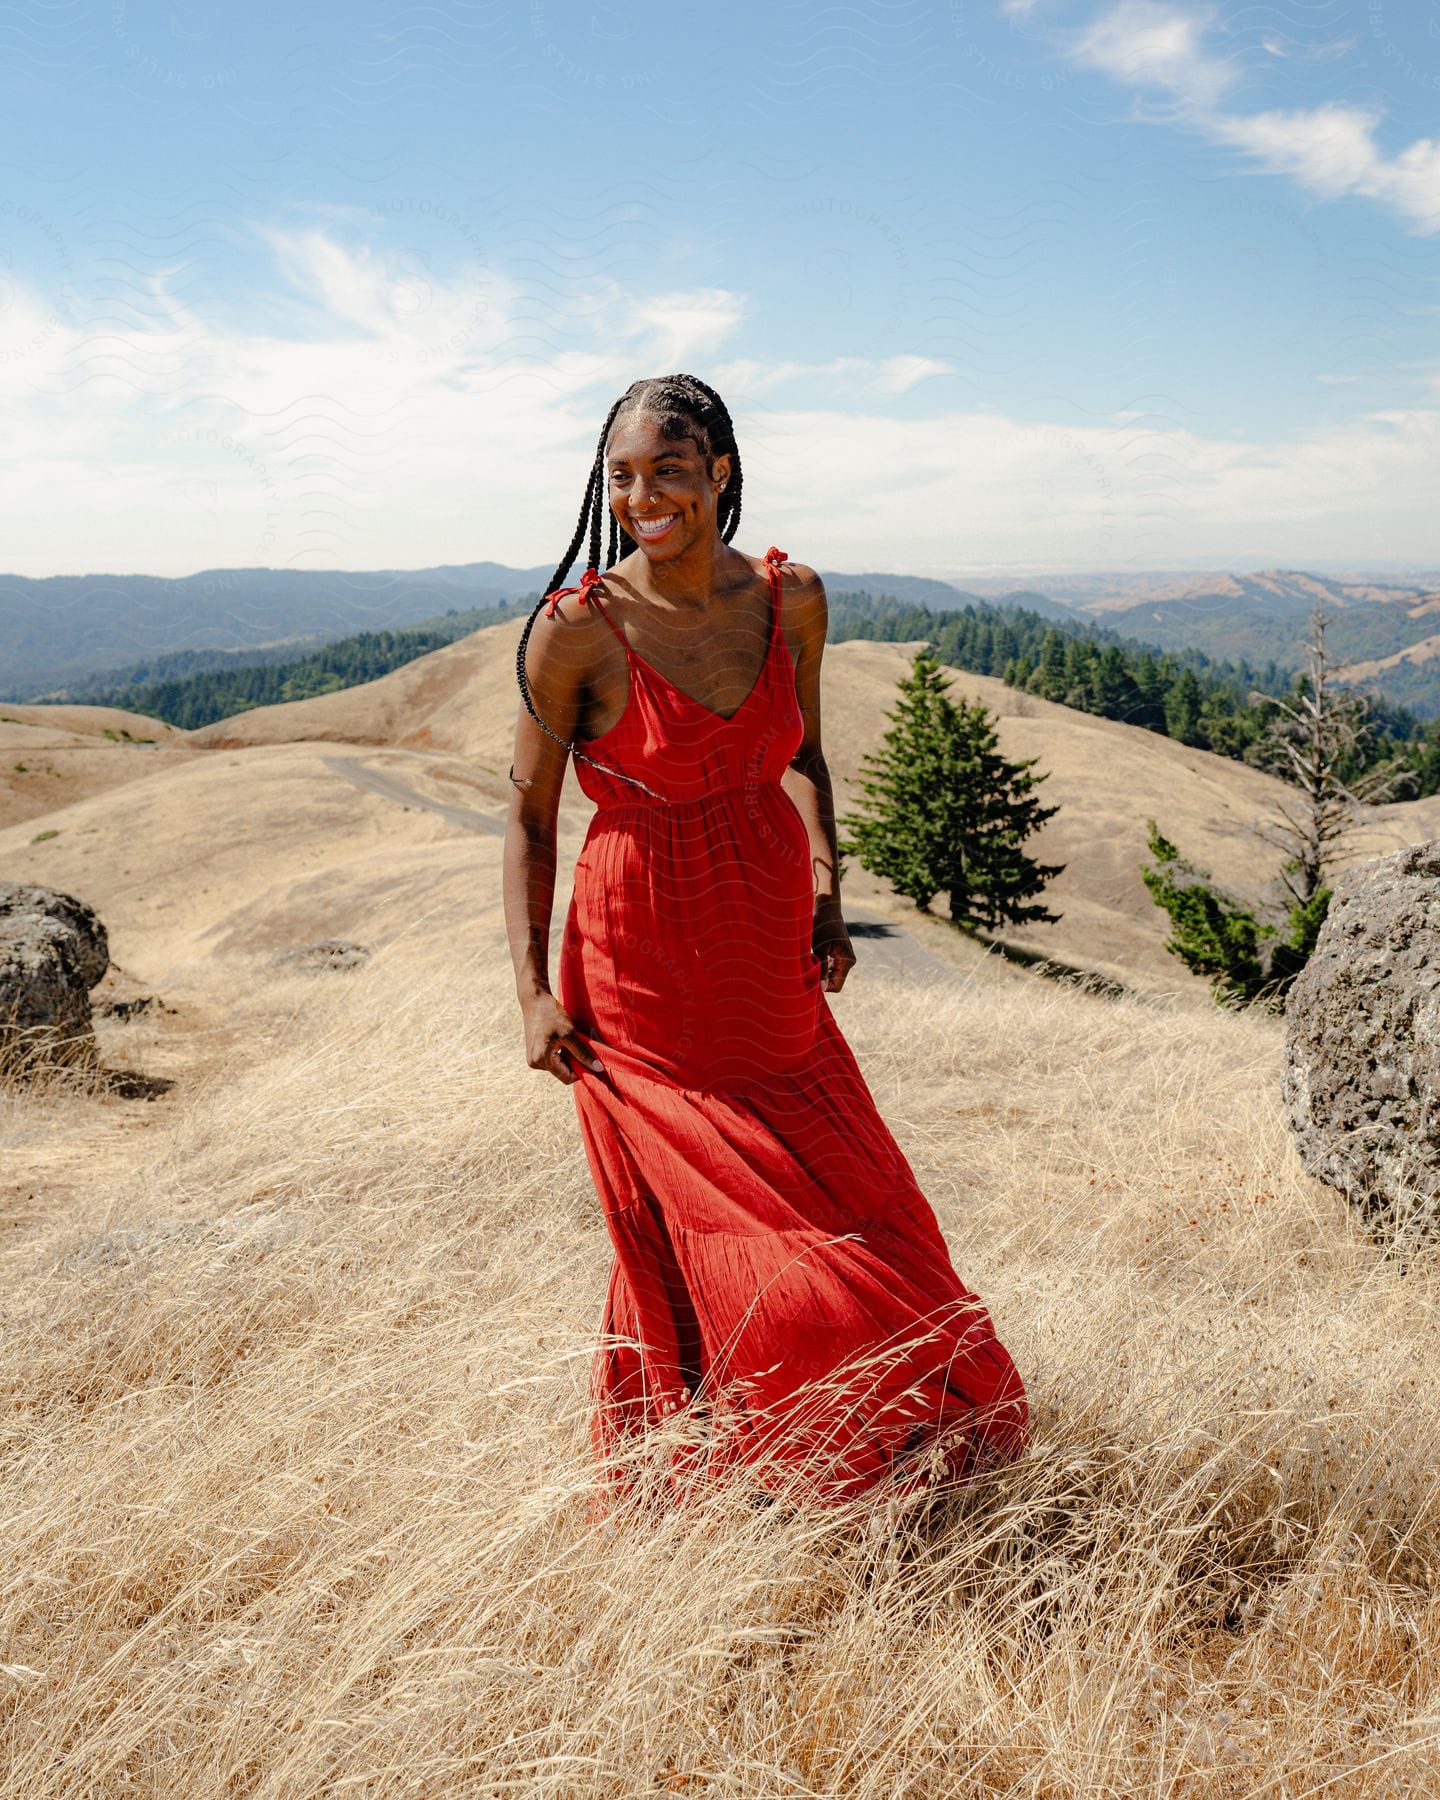 A woman wearing a long red dress smiles as she stands on a hilltop covered in tall dry grass with mountains in the distance